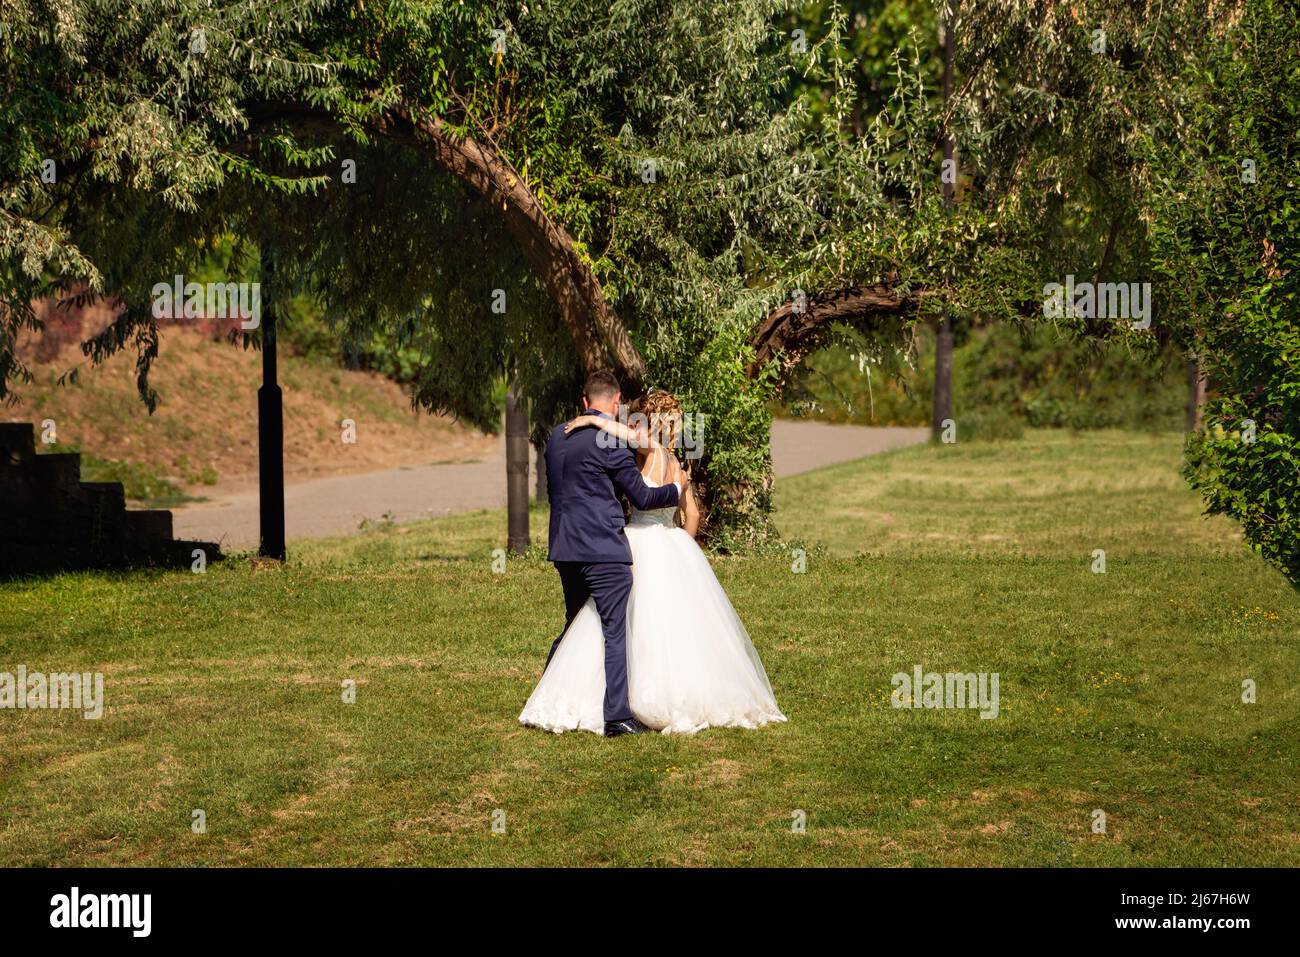 Wedding couple in grass meadow near an arched tree Stock Photo